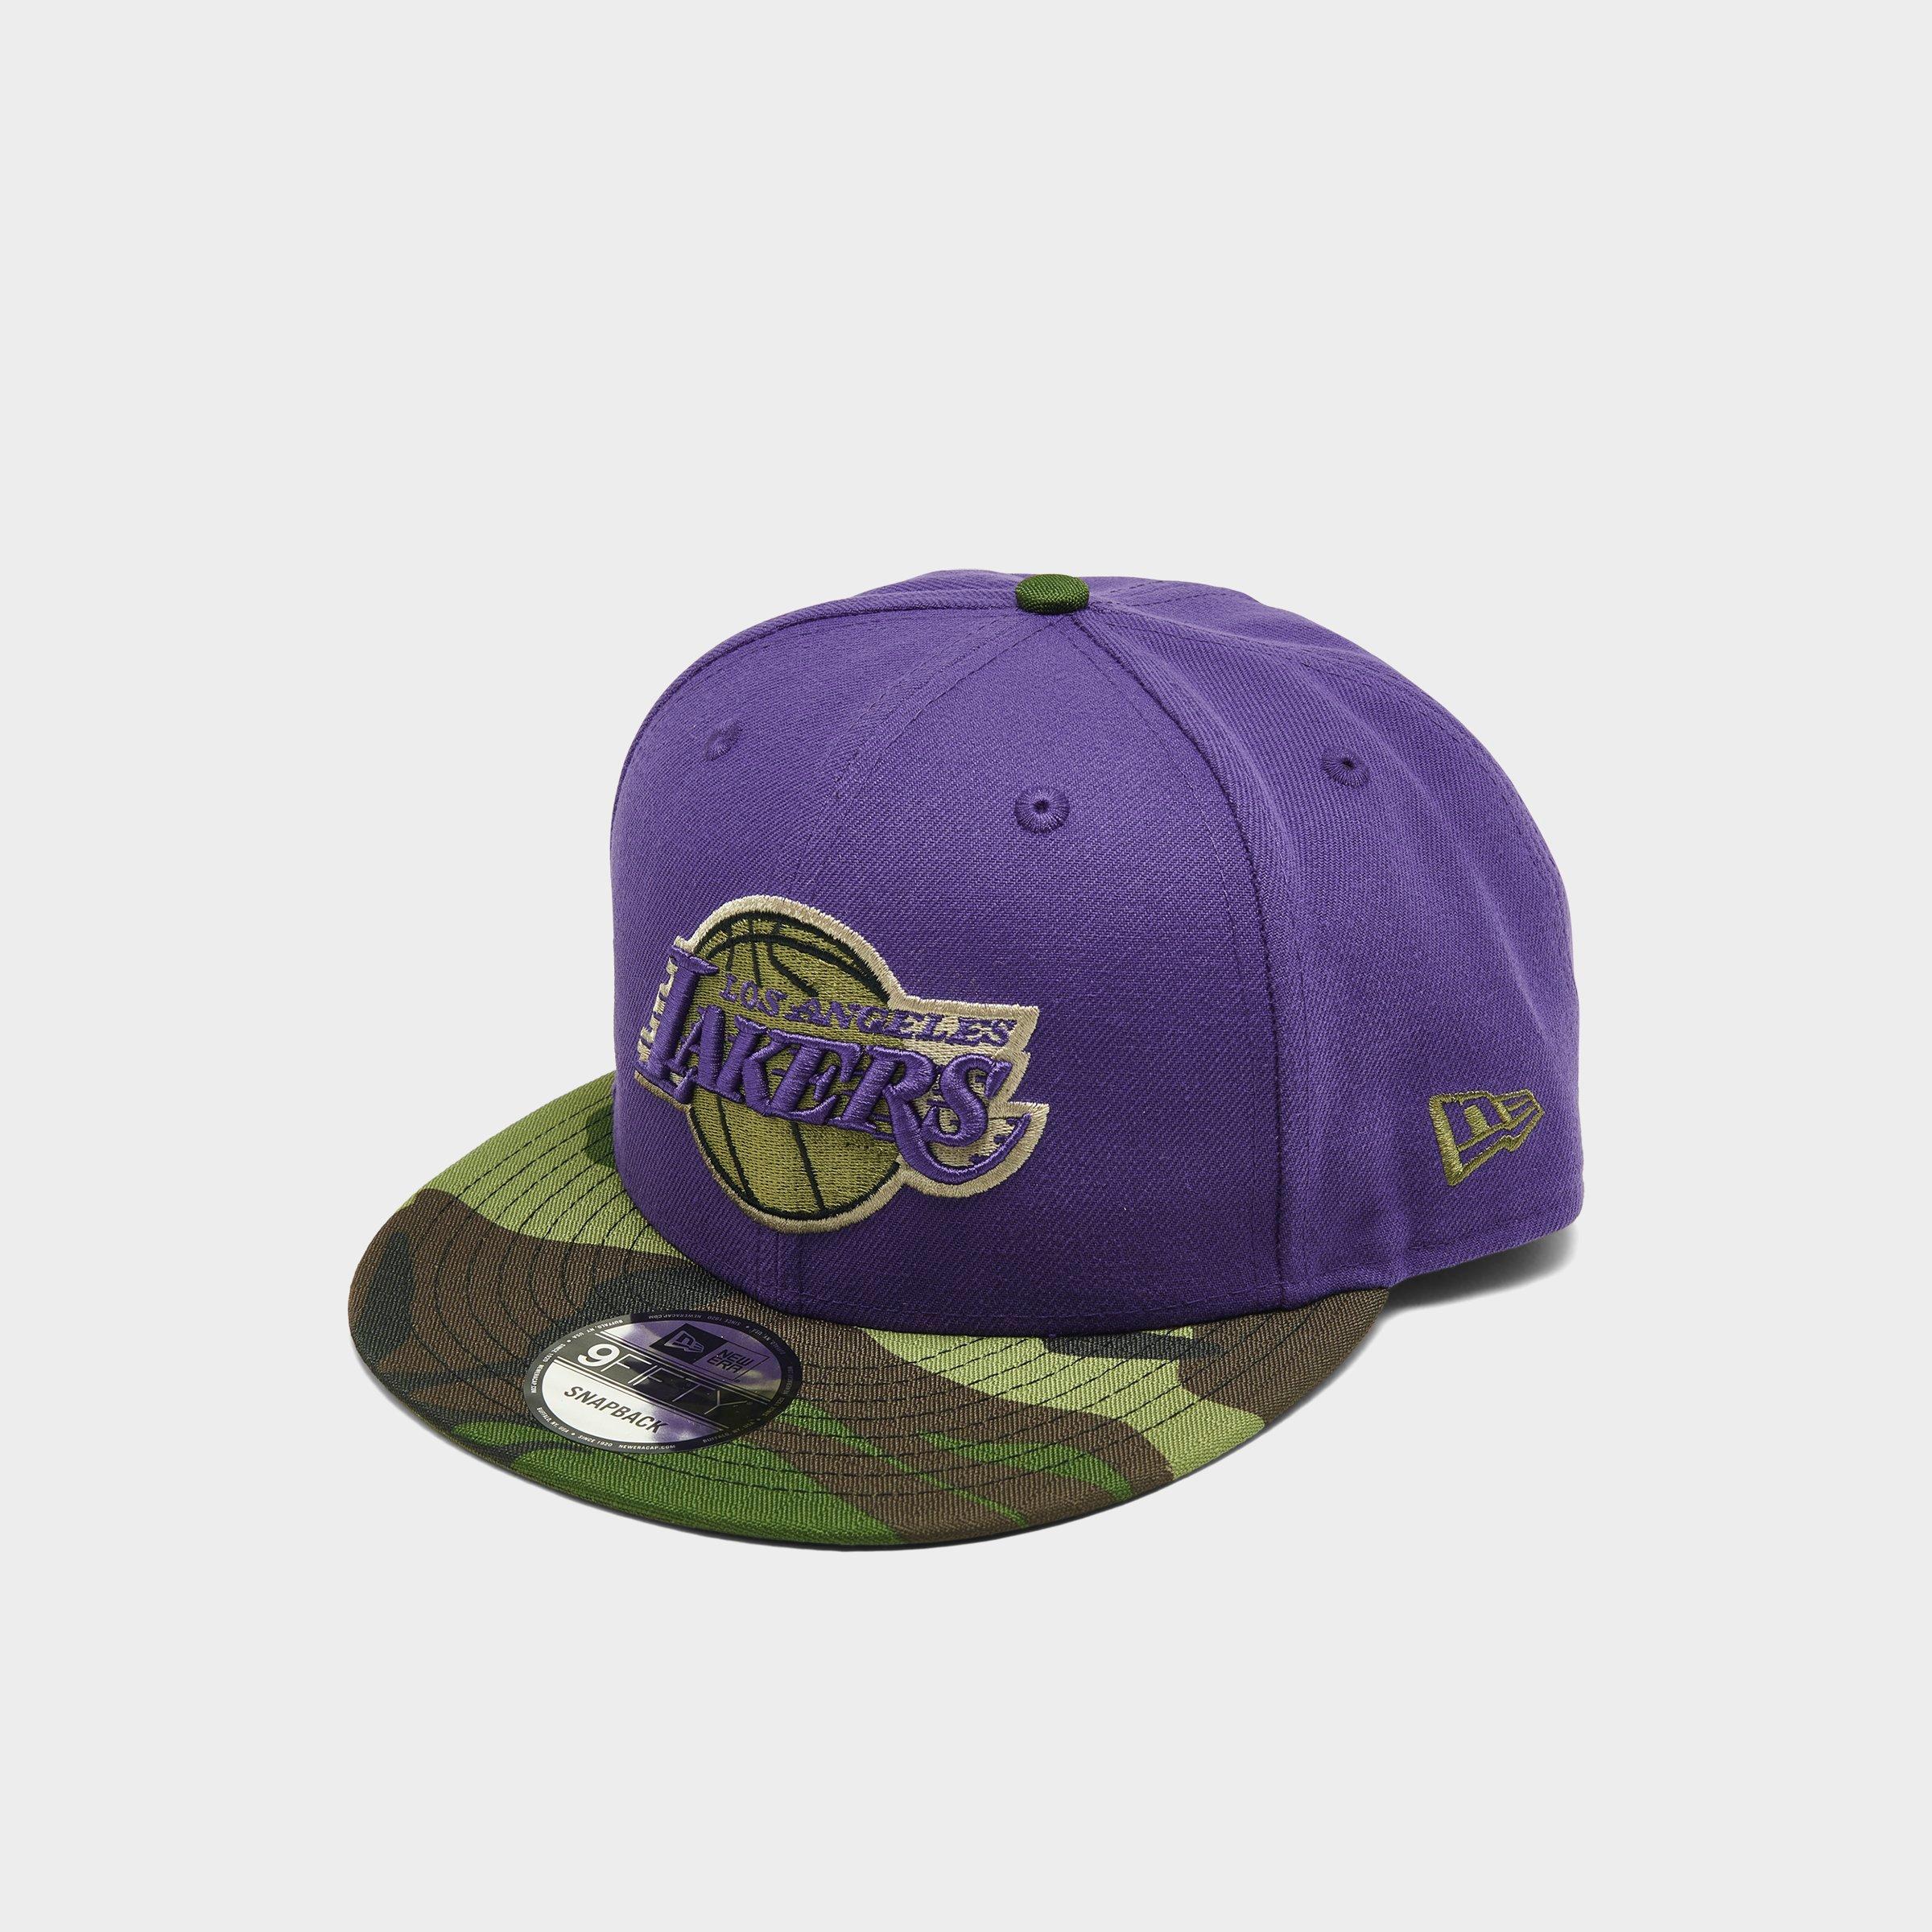 New Era Los Angeles Lakers Nba All Star Game Camo Edition 9fifty Snapback Hat In Purple/camo